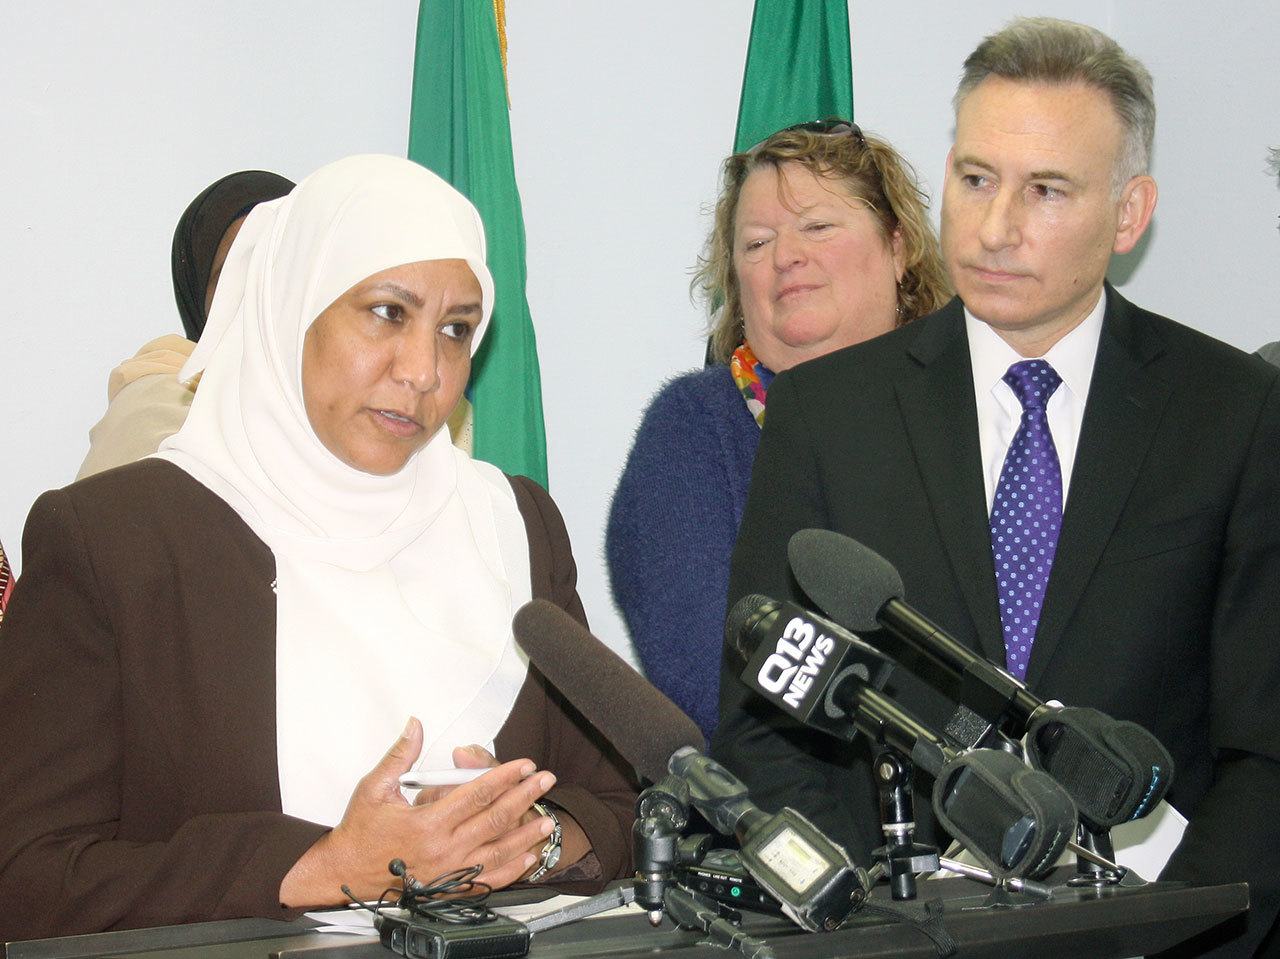 Risho Sapano, executive director of the Mother Africa resource center in Kent, speaks at a Dec. 15 press conference as King County Executive Dow Constantine looks on during an annoucement about funding for 27 nonprofit groups as part of the Best Starts for Kids levy.